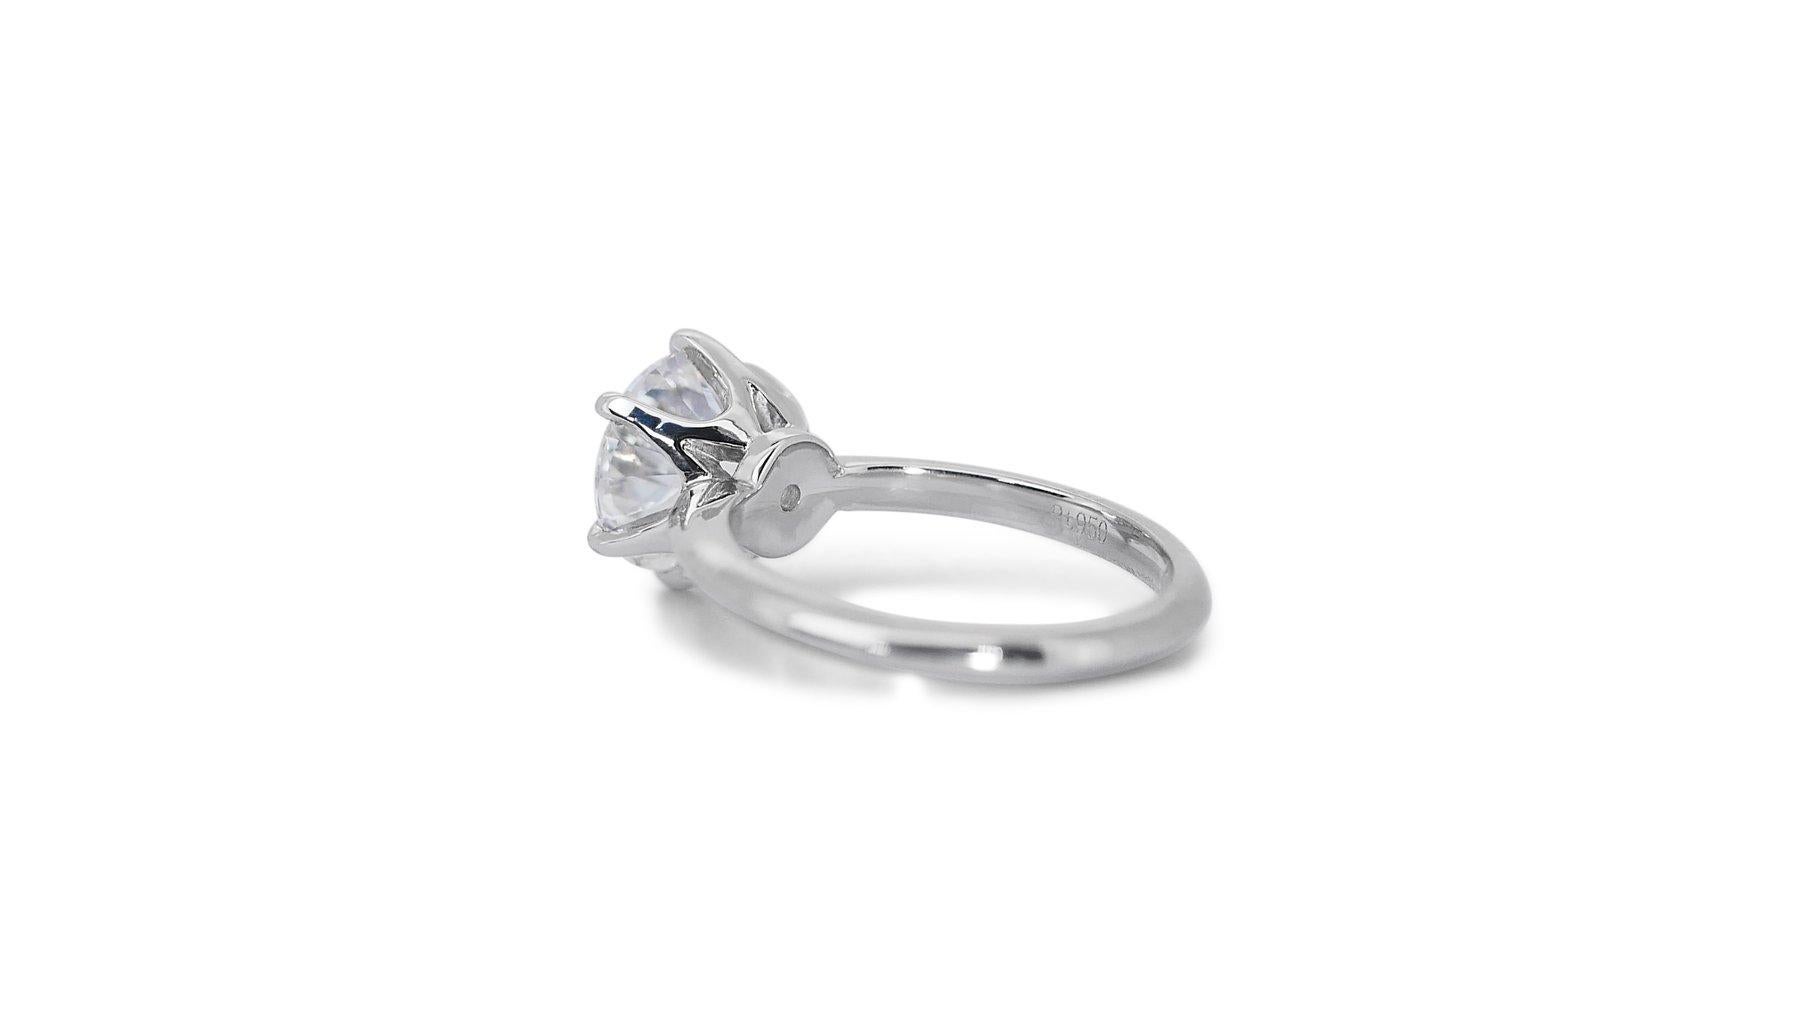 Stunning 18k White Gold 3.00 Carat Round Brilliant Diamond Solitaire Ring For Sale 3